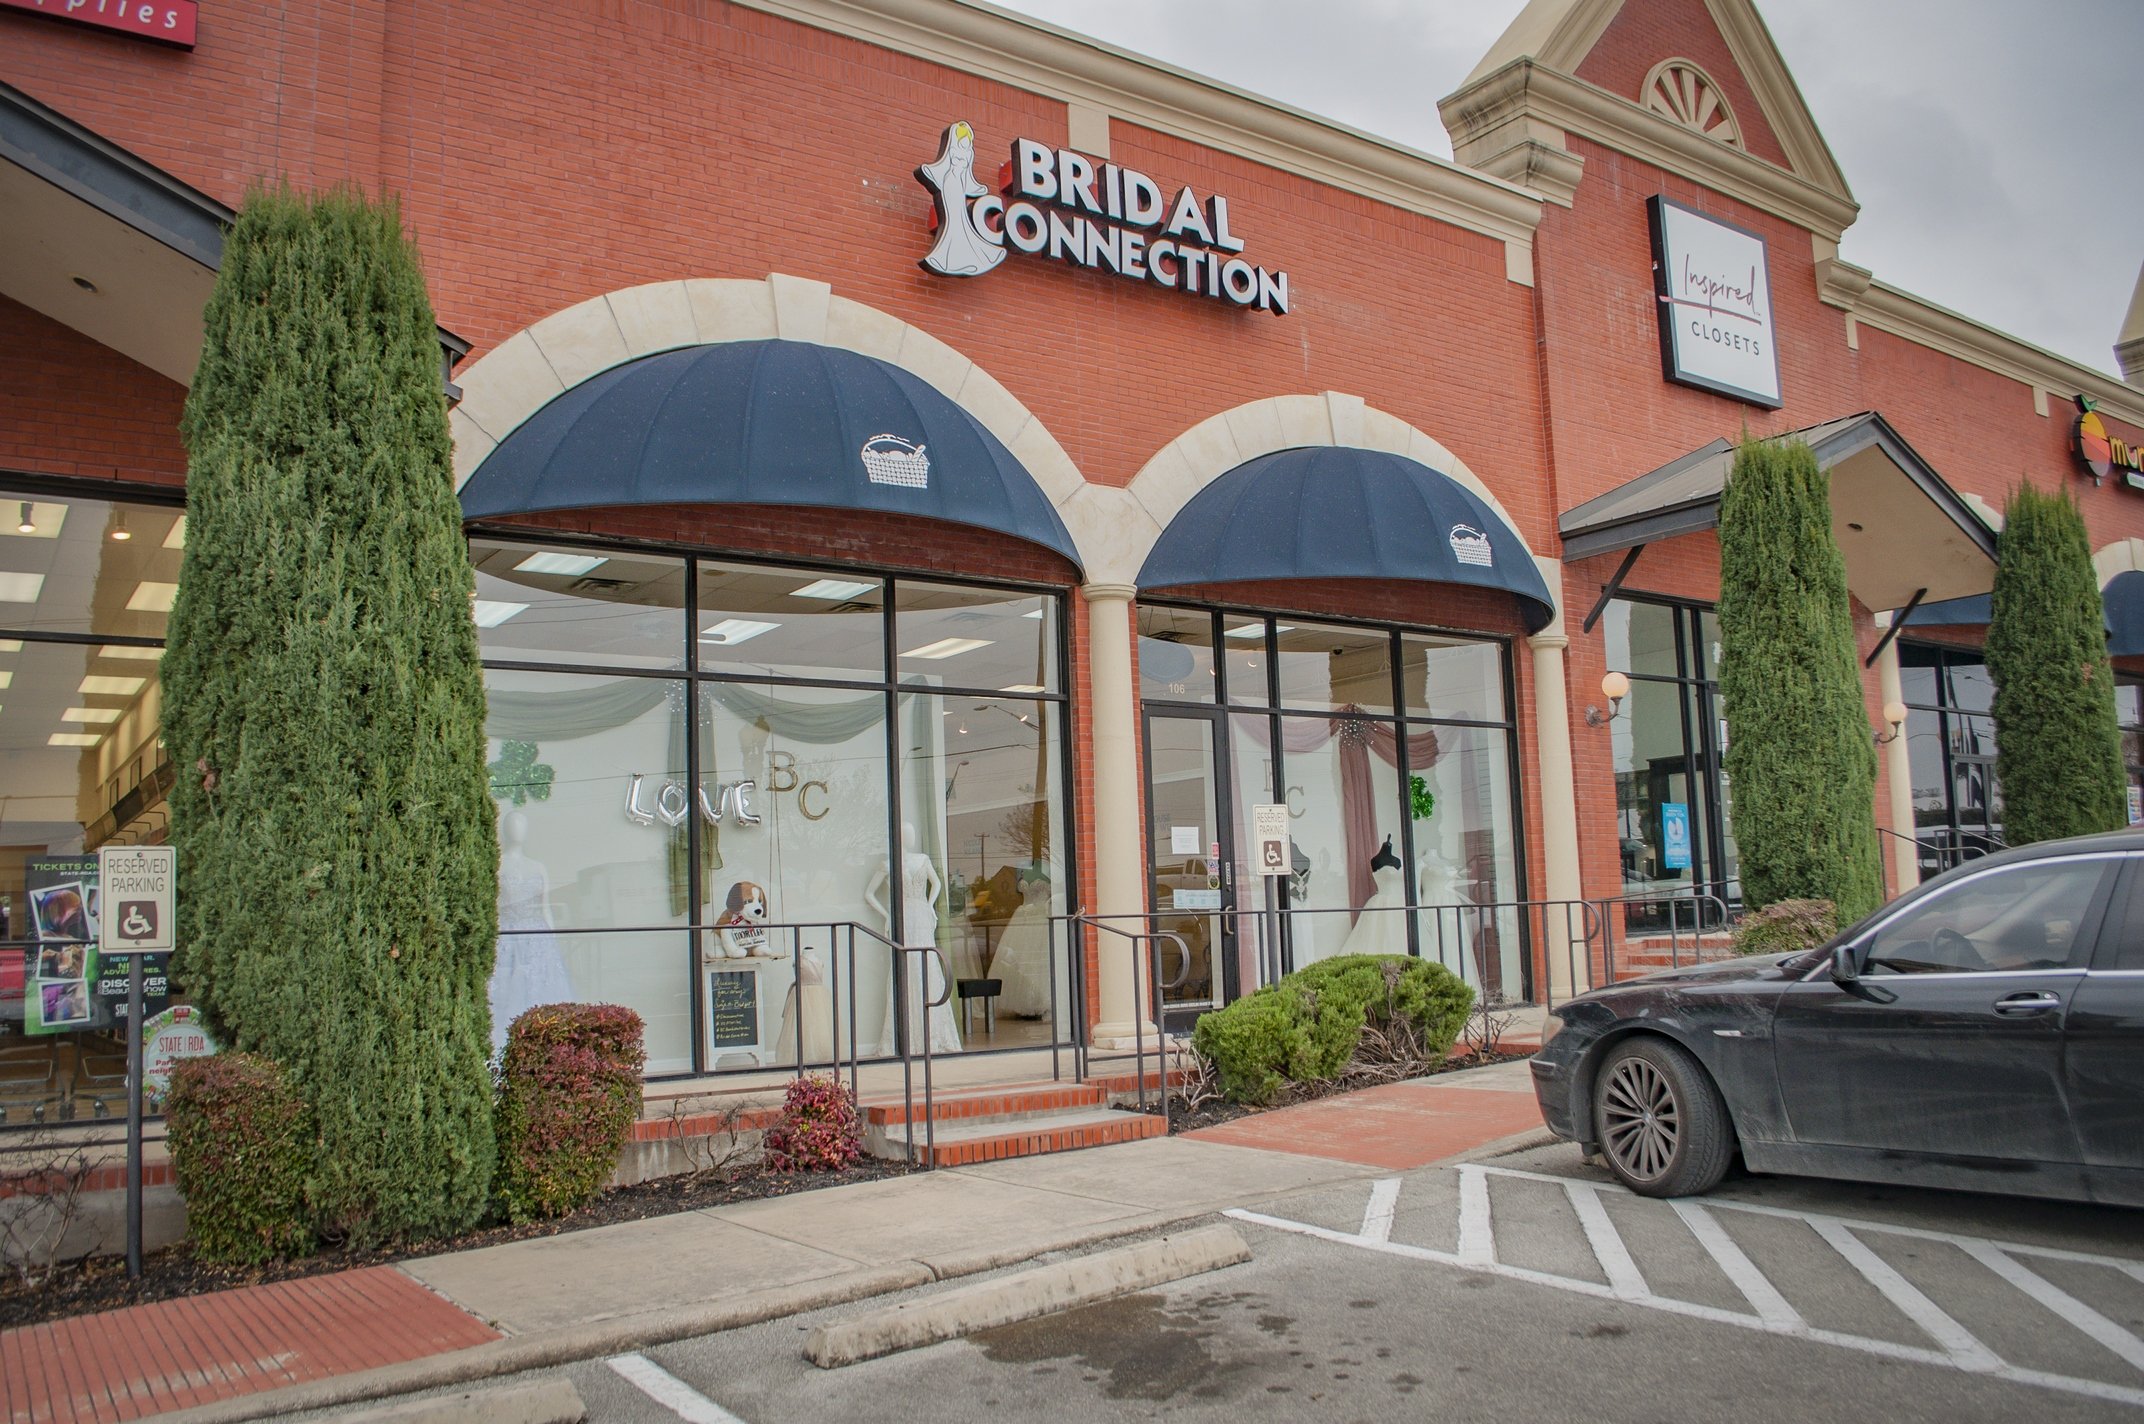 outside the Bridal Connection store